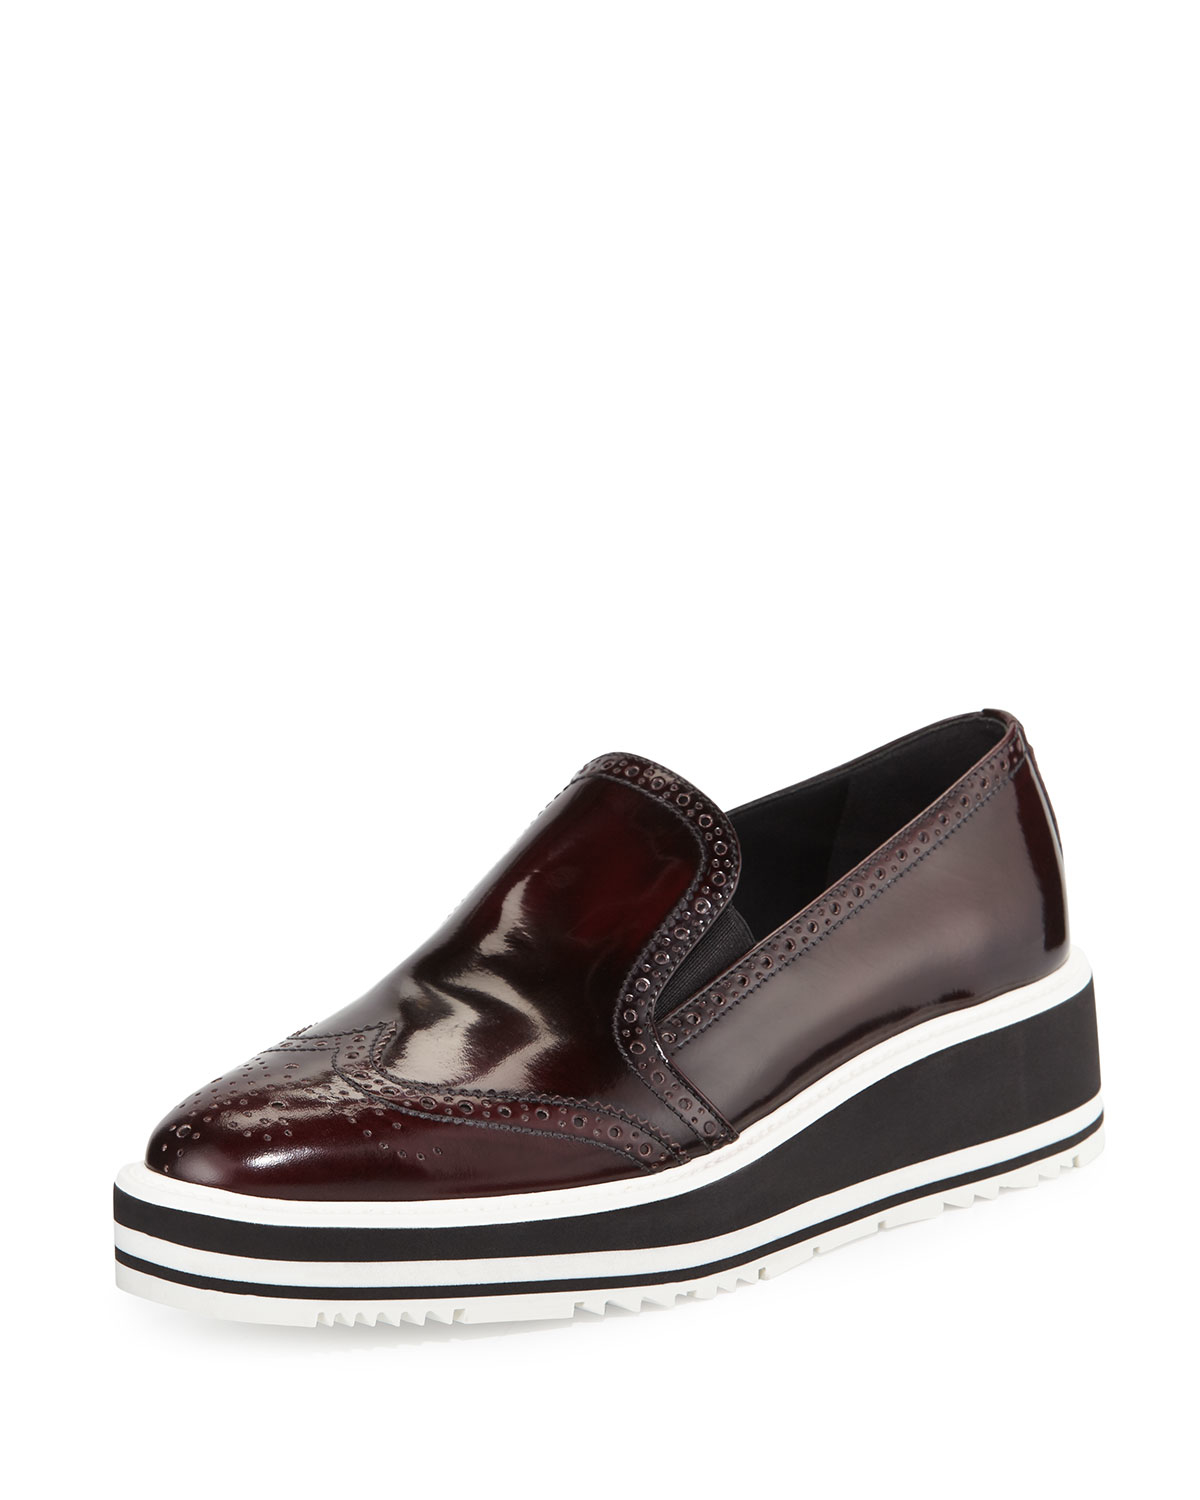 Lyst - Prada Polished Leather Platform Loafers in Brown